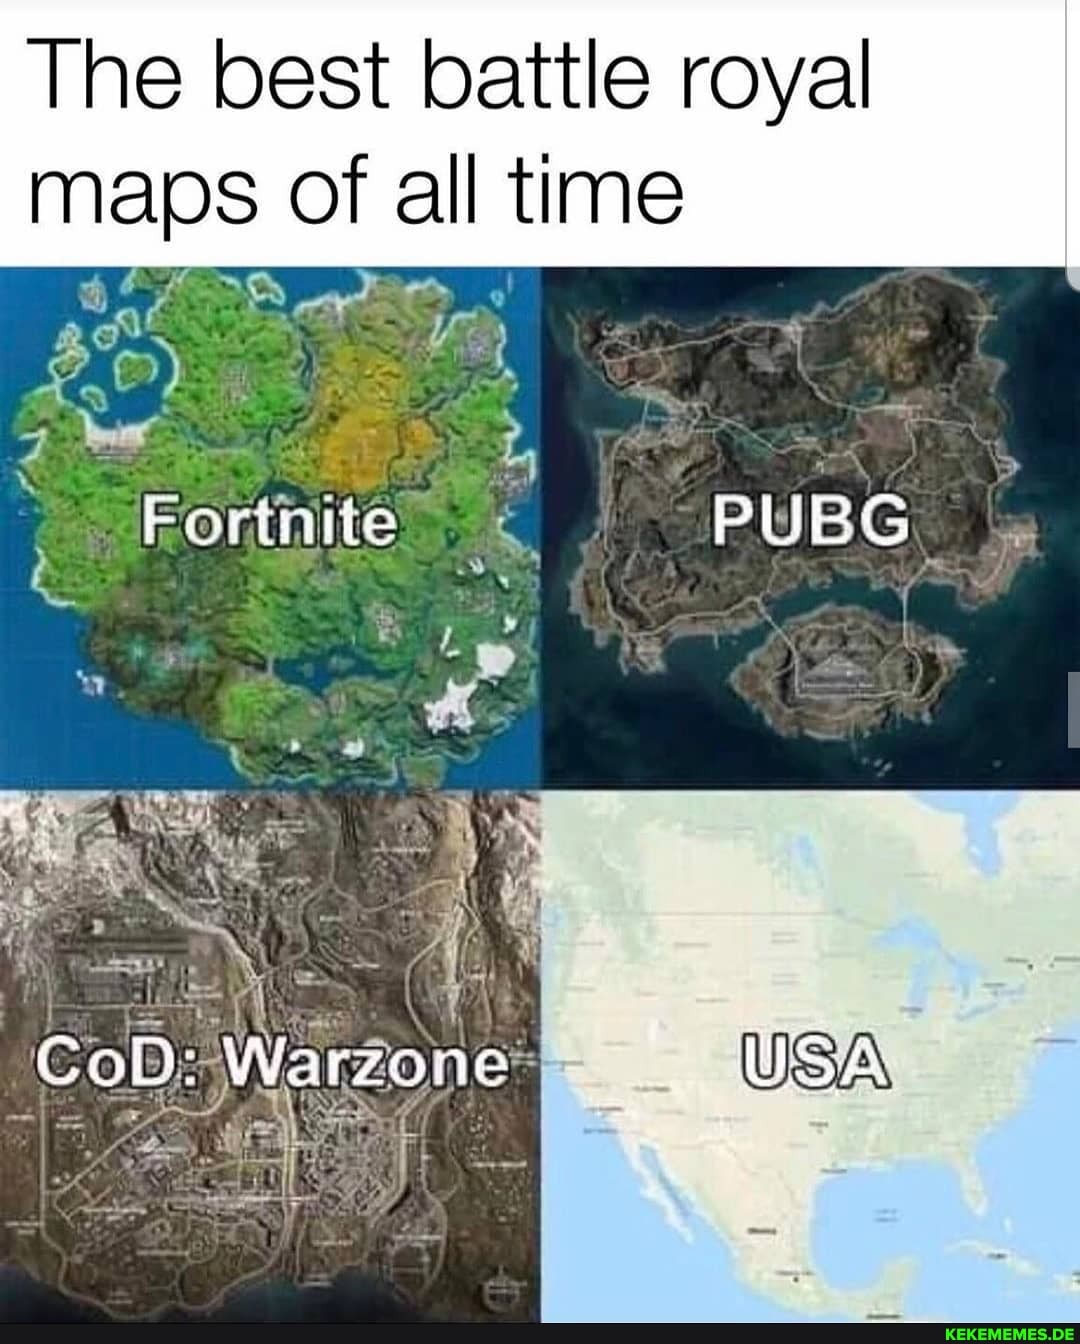 The best battle royal maps of all time Fortnite PUBG om, t Wii Gob: Warzone USA